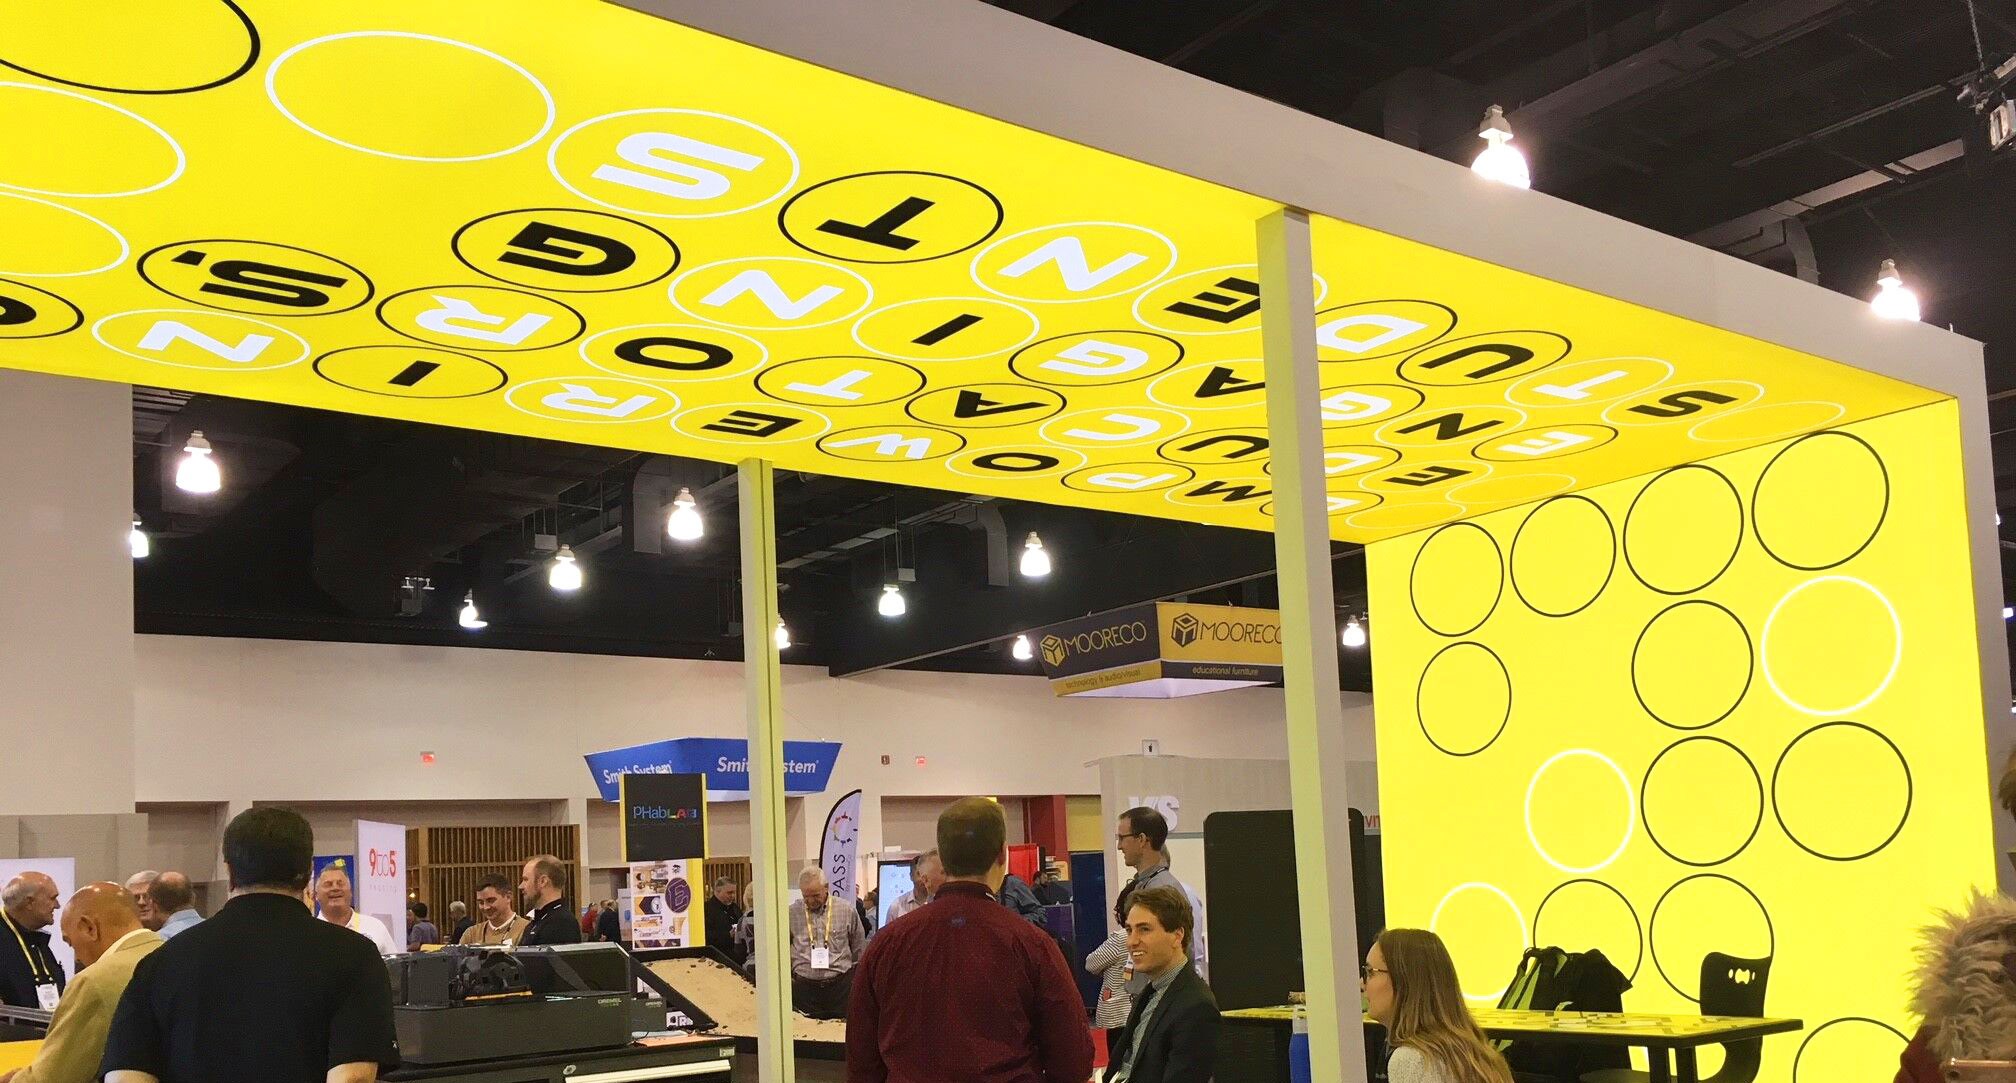 Palmer Hamilton Trade Show Booth that uses freestanding and arched lightboxes to create an environment